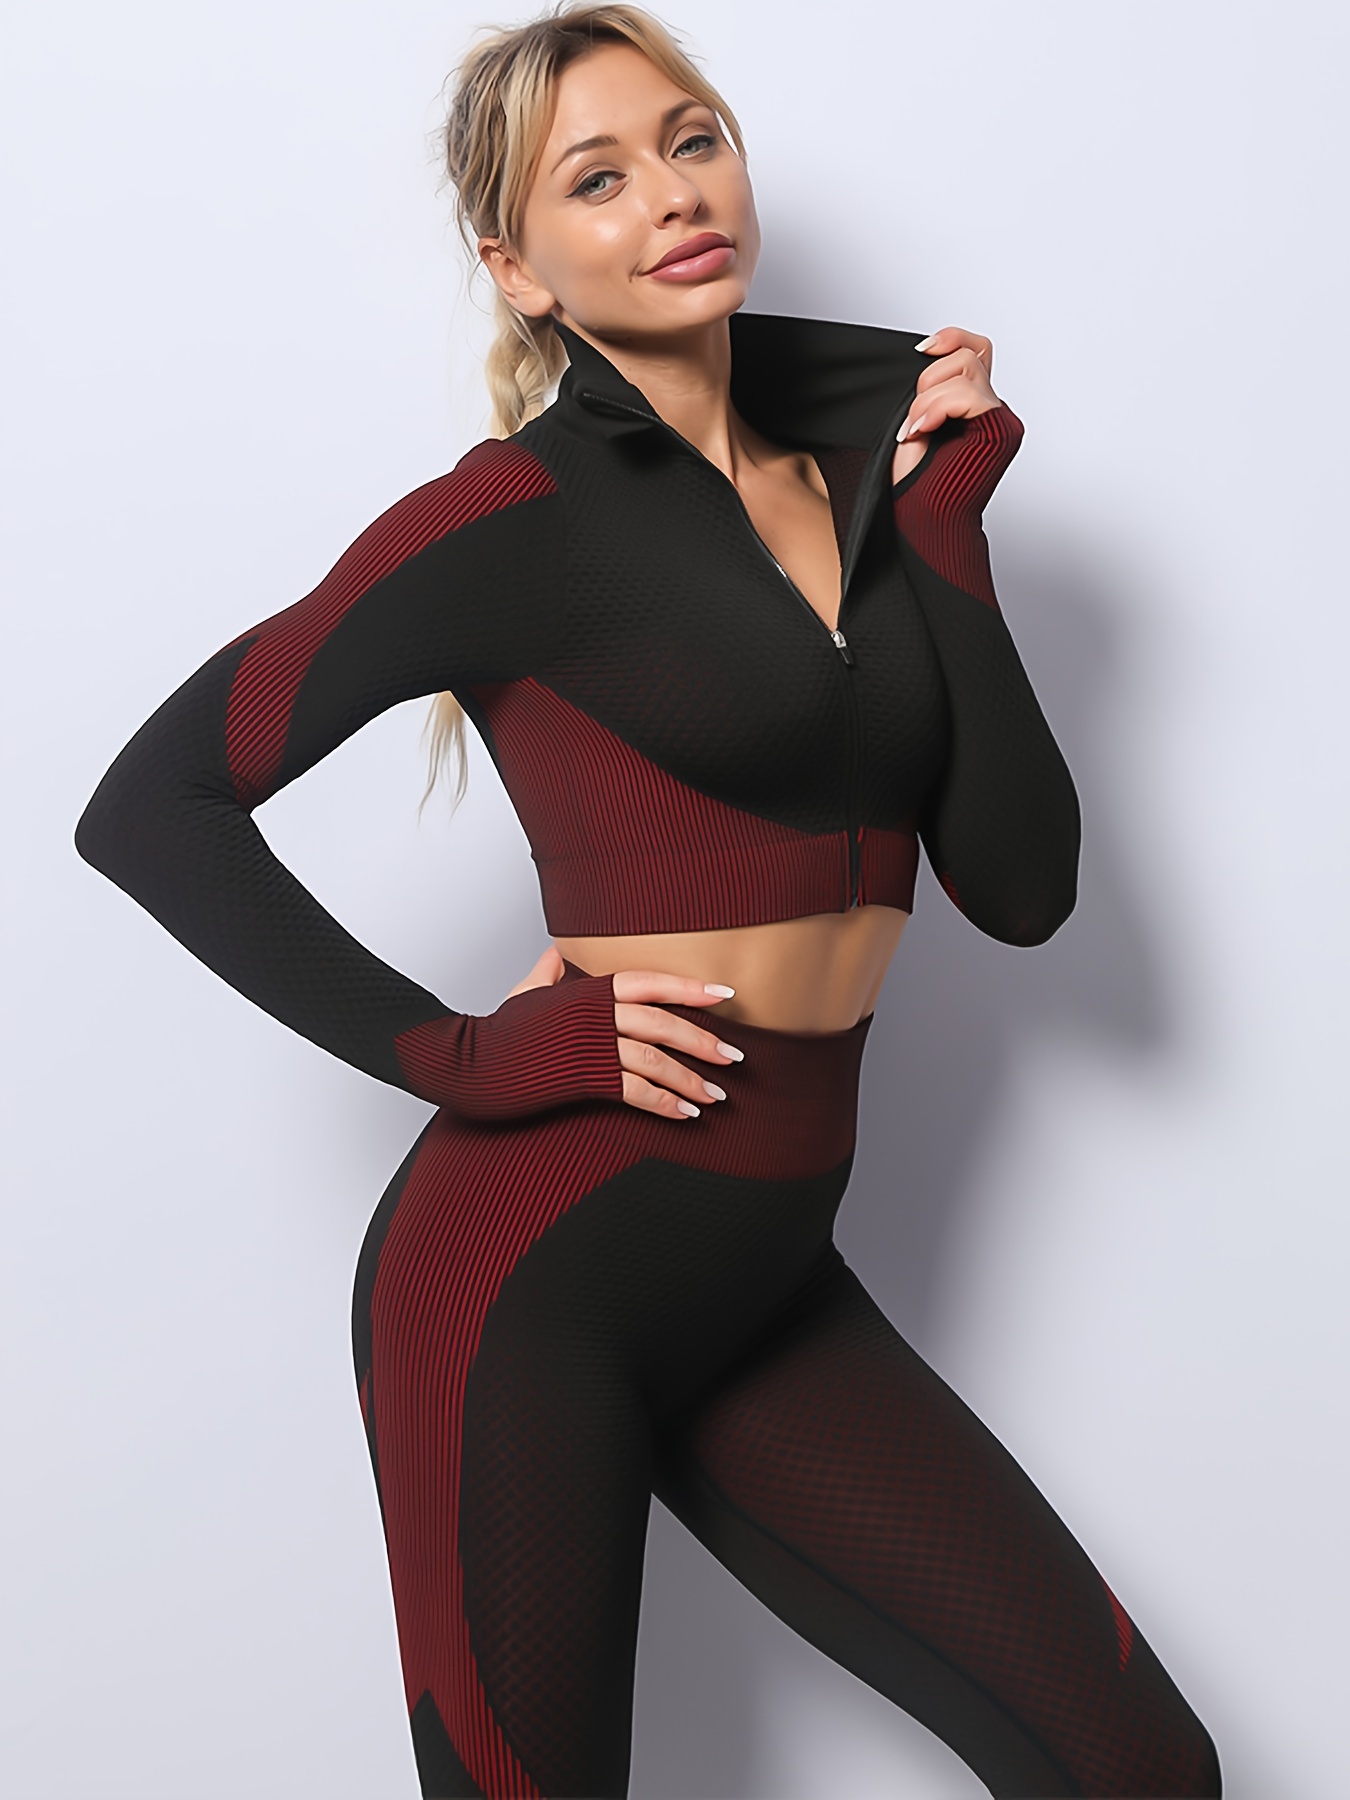 Womens Ribbed Seamless Workout Sets Yoga Leggings And Top For Gym And  Fitness Activities From Debf, $23.02